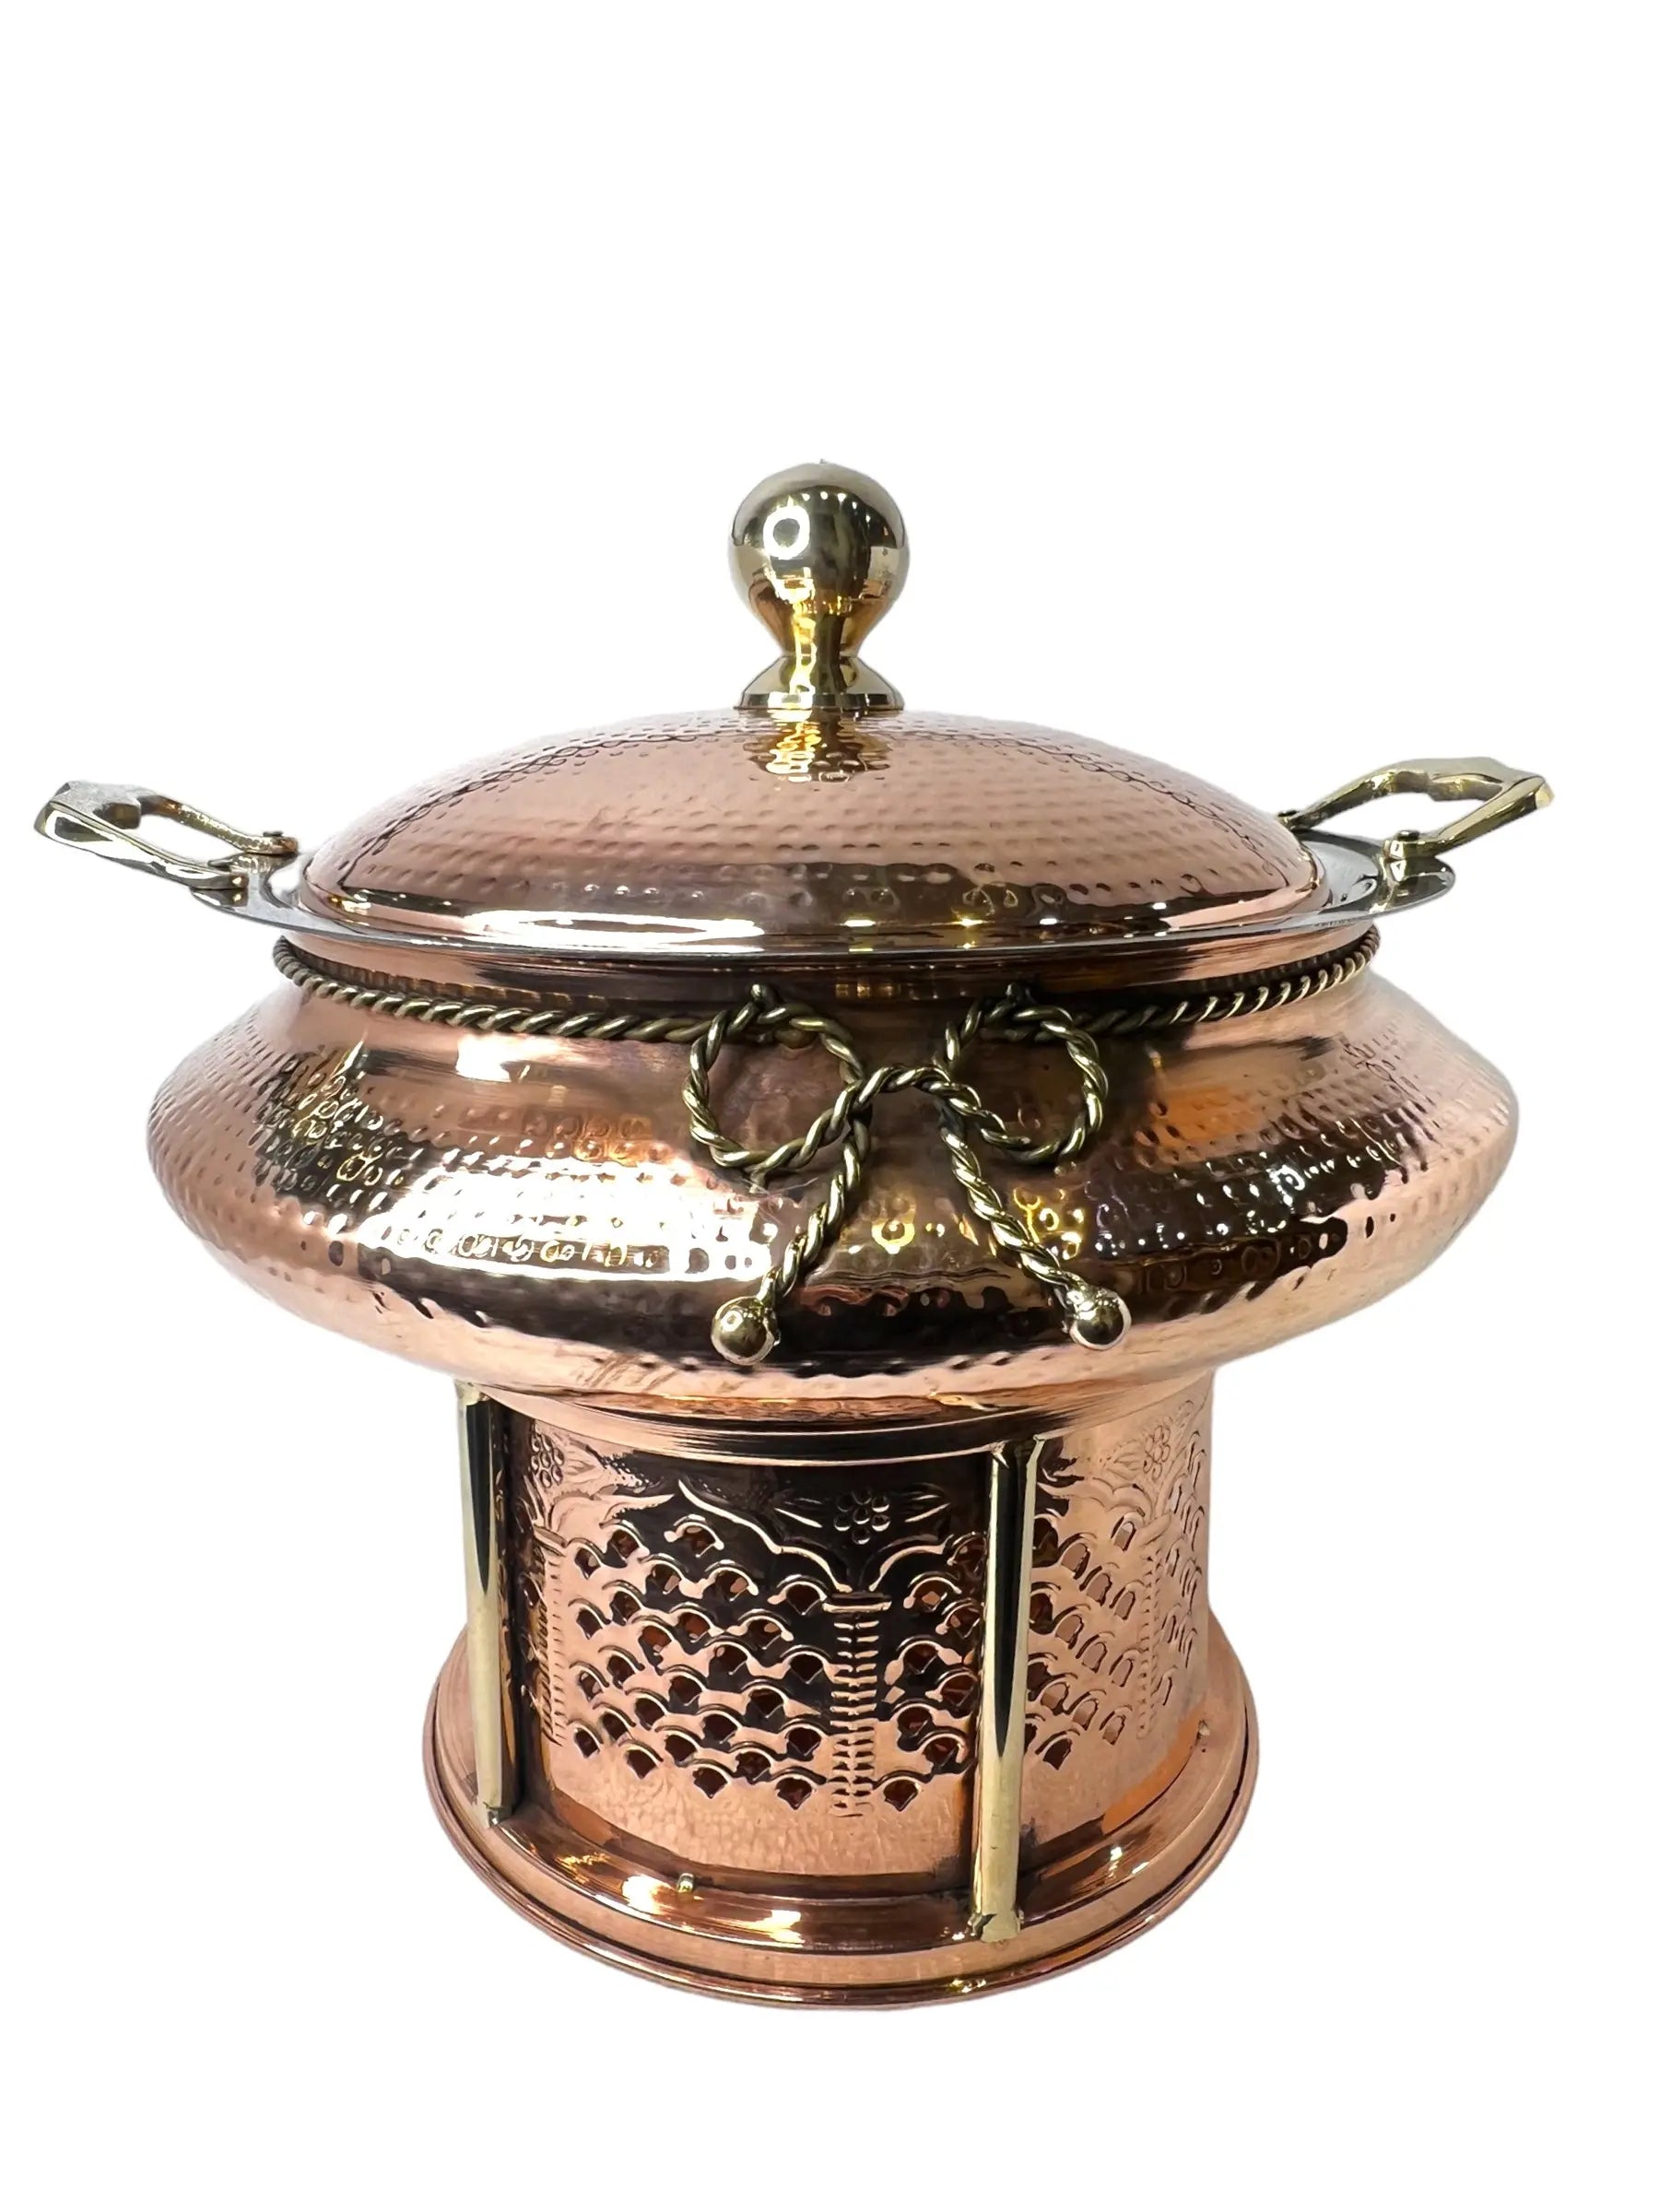 Crockery Wala And Company Copper Steel Chafing dish with traditional Indian rich look - CROCKERY WALA AND COMPANY 